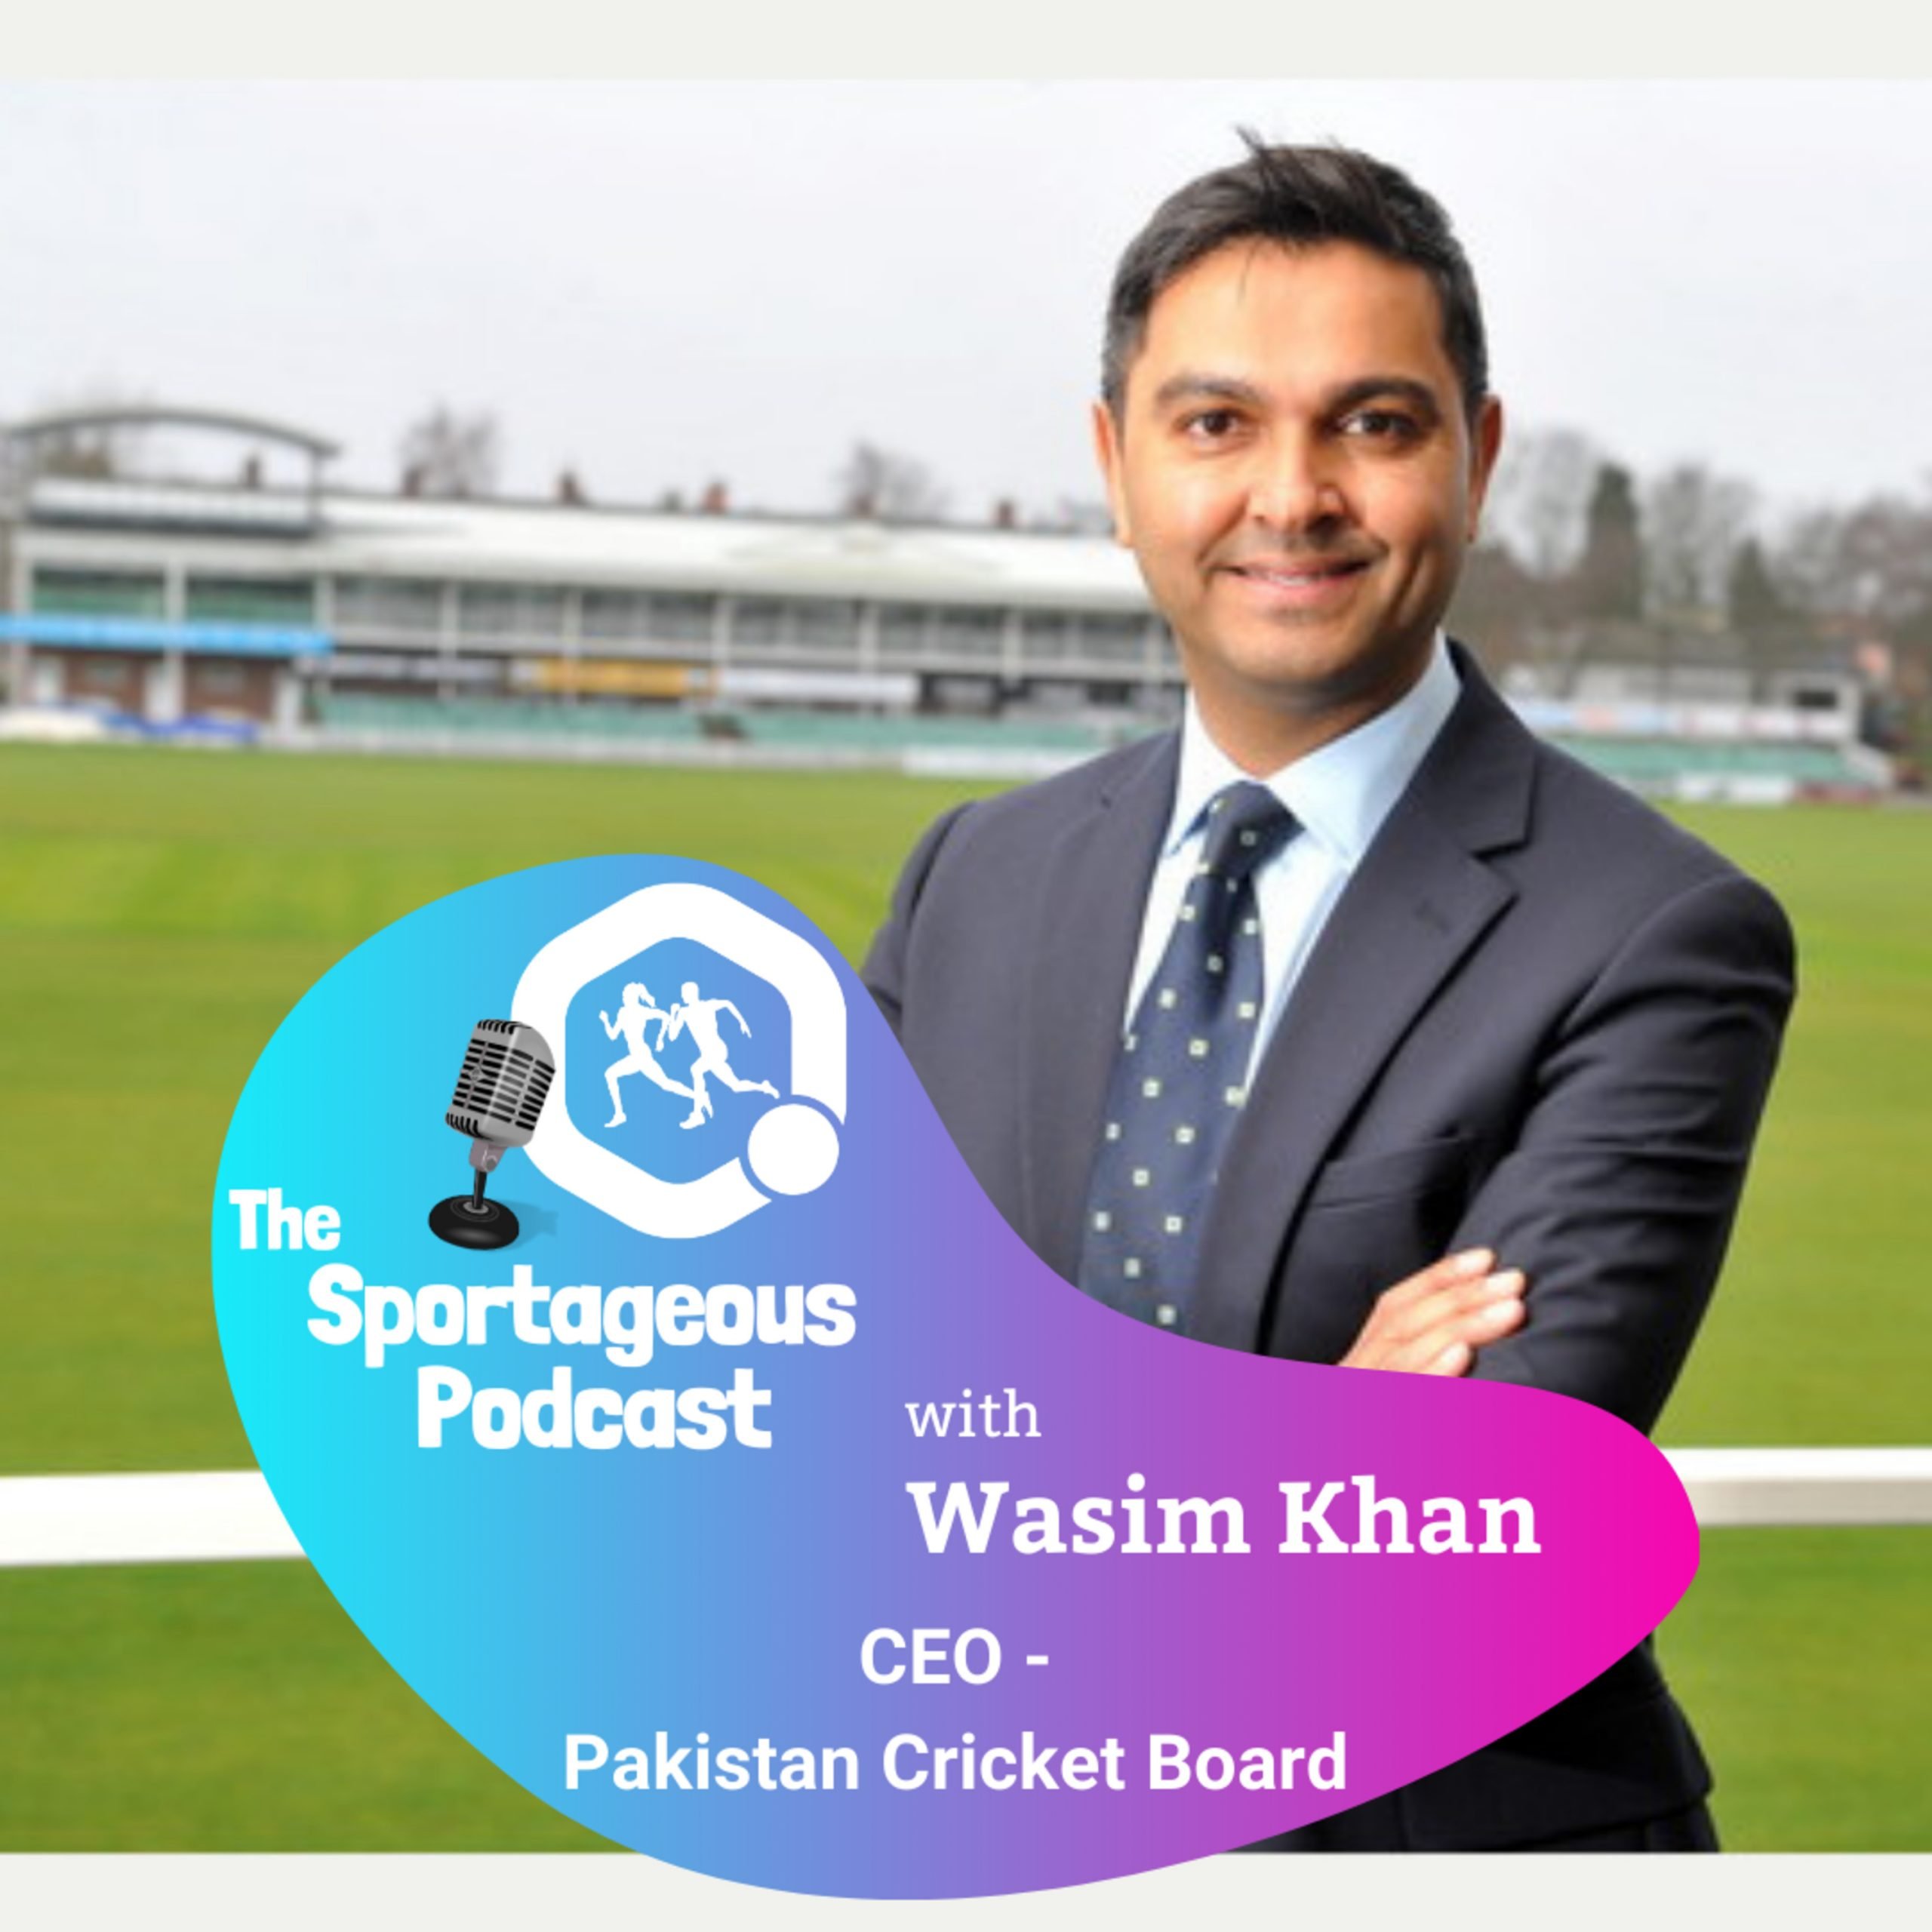 PCB CEO, Wasim Khan on tours to Pakistan, womens cricket and his journey to the top